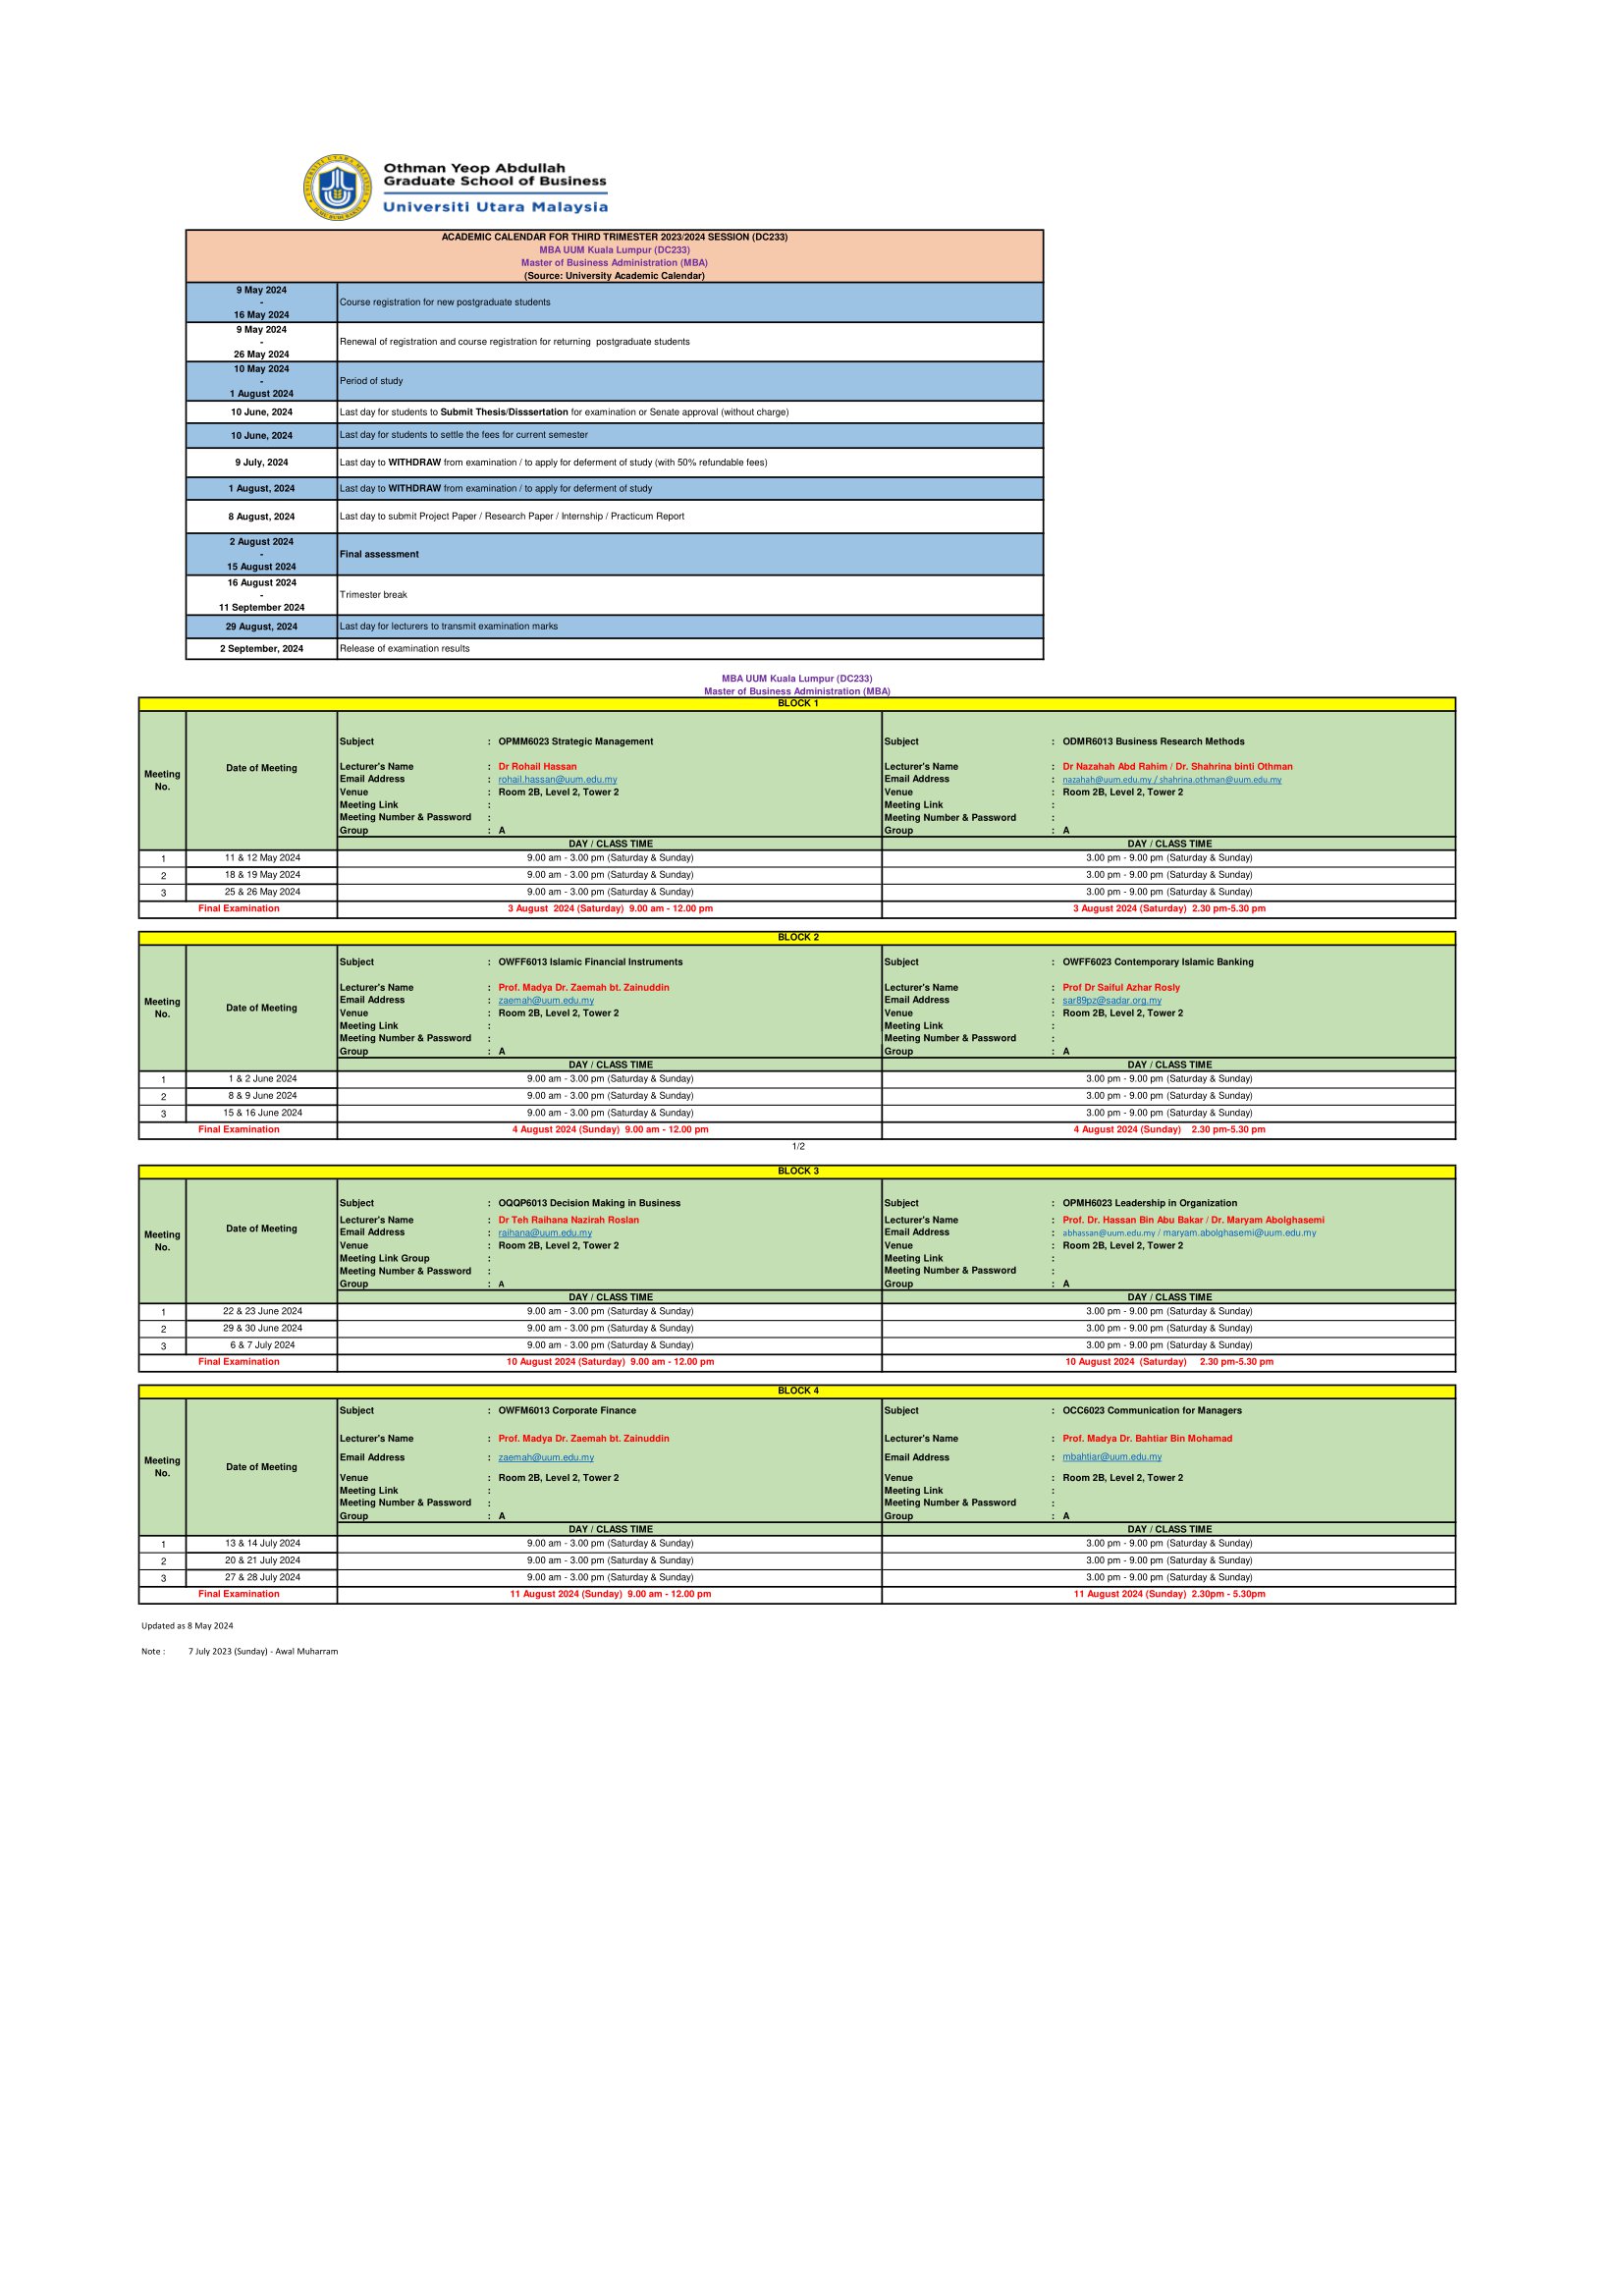 mba-kl-class-timetable-233-edited